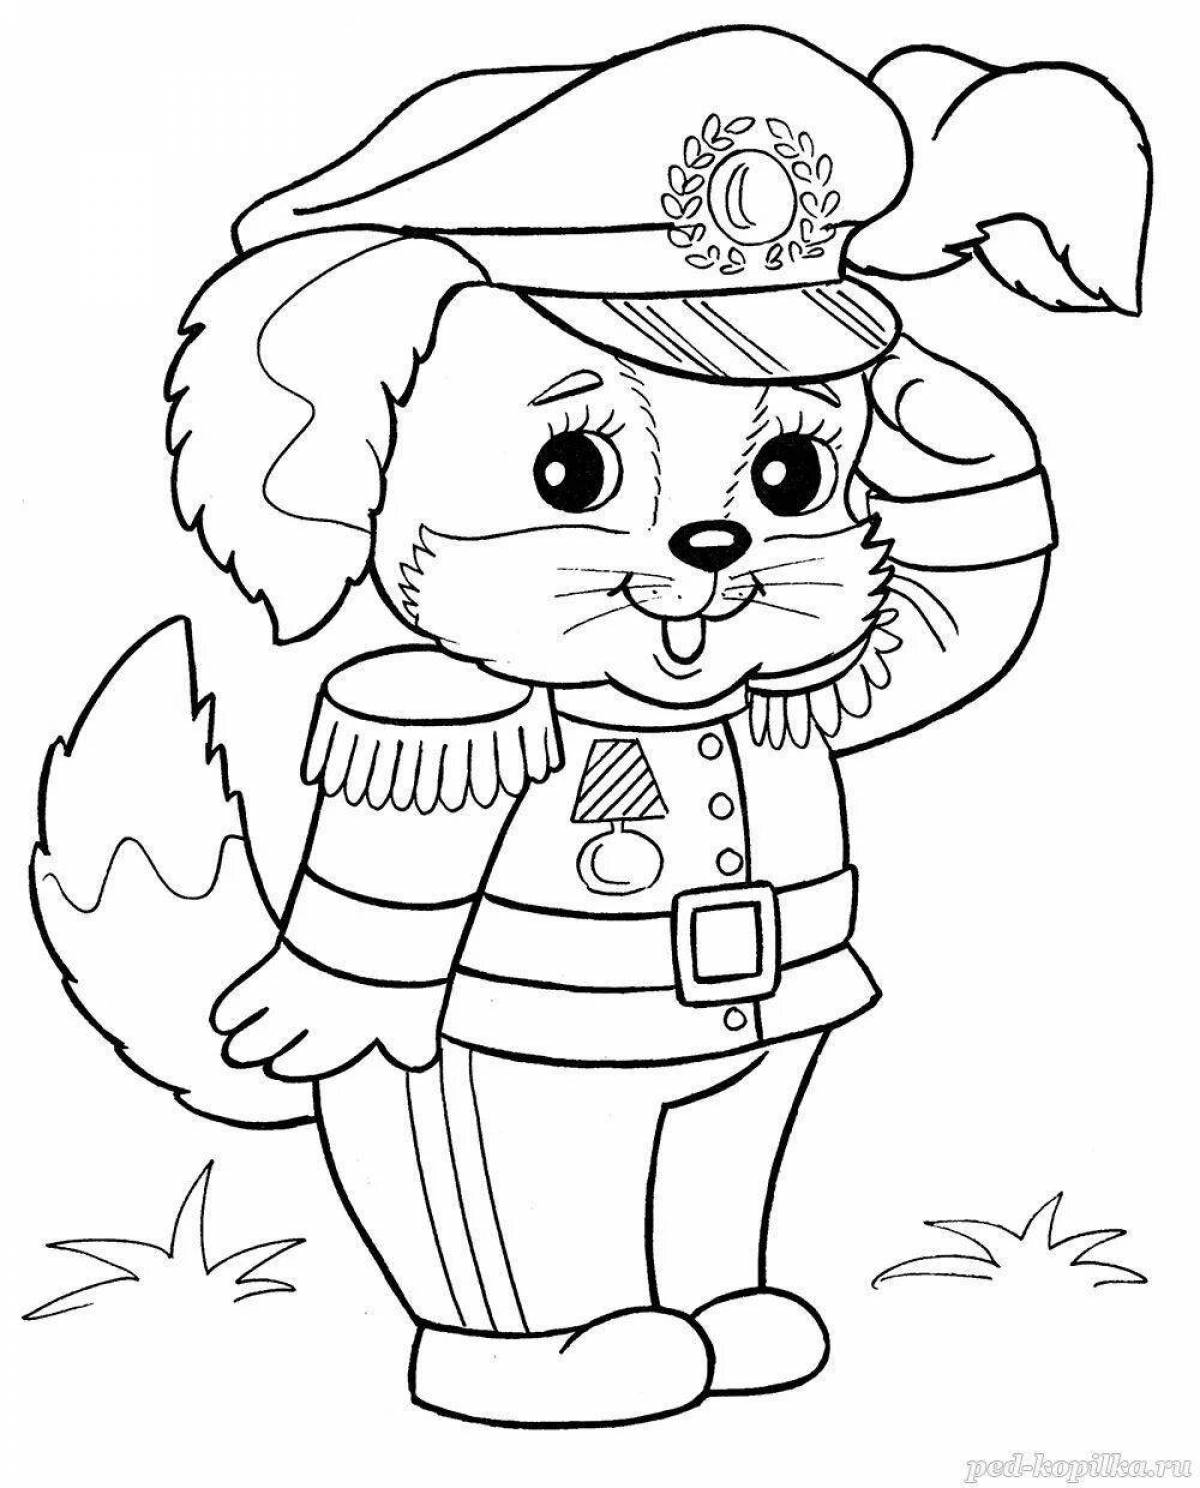 Coloring live military cat